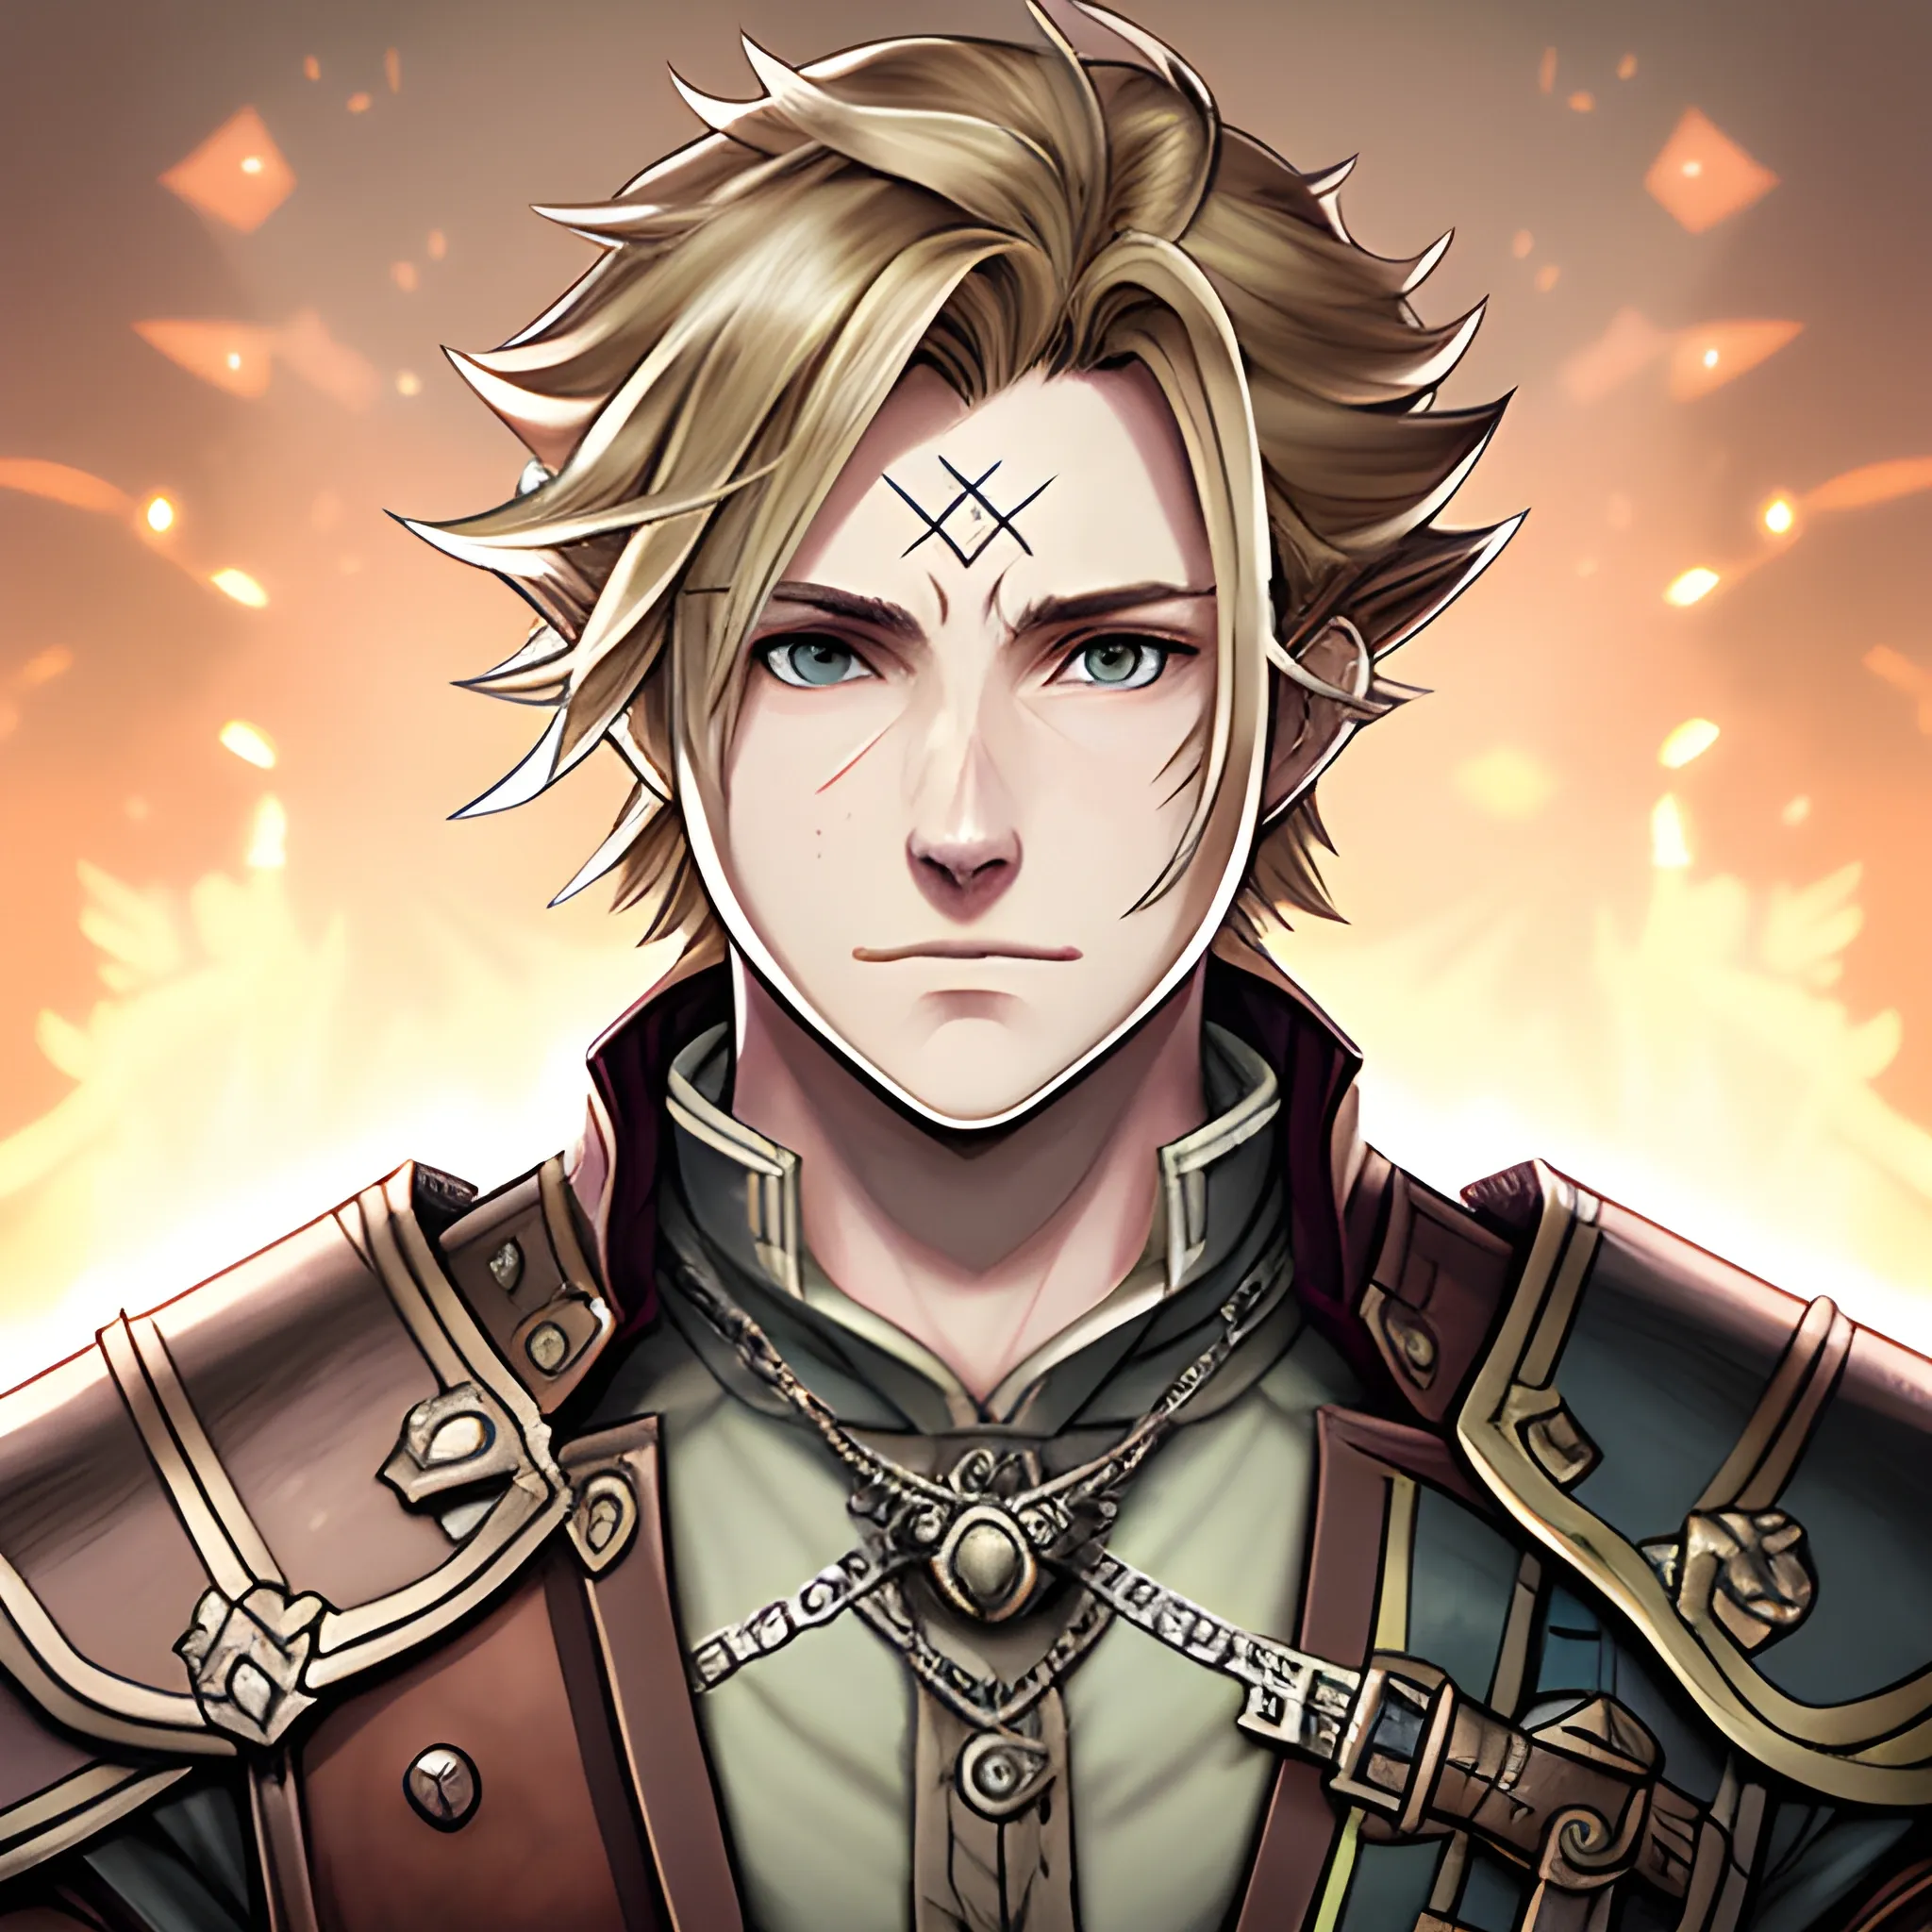 {{{octopath traveler style rpg character art of powerful fantasy male warrior with smug face}}}, highly detailed, {hyperrealistic waist up portrait of 20 year old Cullen Rutherford from Dragon Age with simple background oil colors}, overflowing energy, Cullen Rutherford red furred armor, wearing silver necklace, illustrated, short blonde hair, sharp focus, elegant, volumetric lighting, smooth, in style of octopath traveller videogame, thick black outlines, cartoony, anime, art by Naoki Ikushima